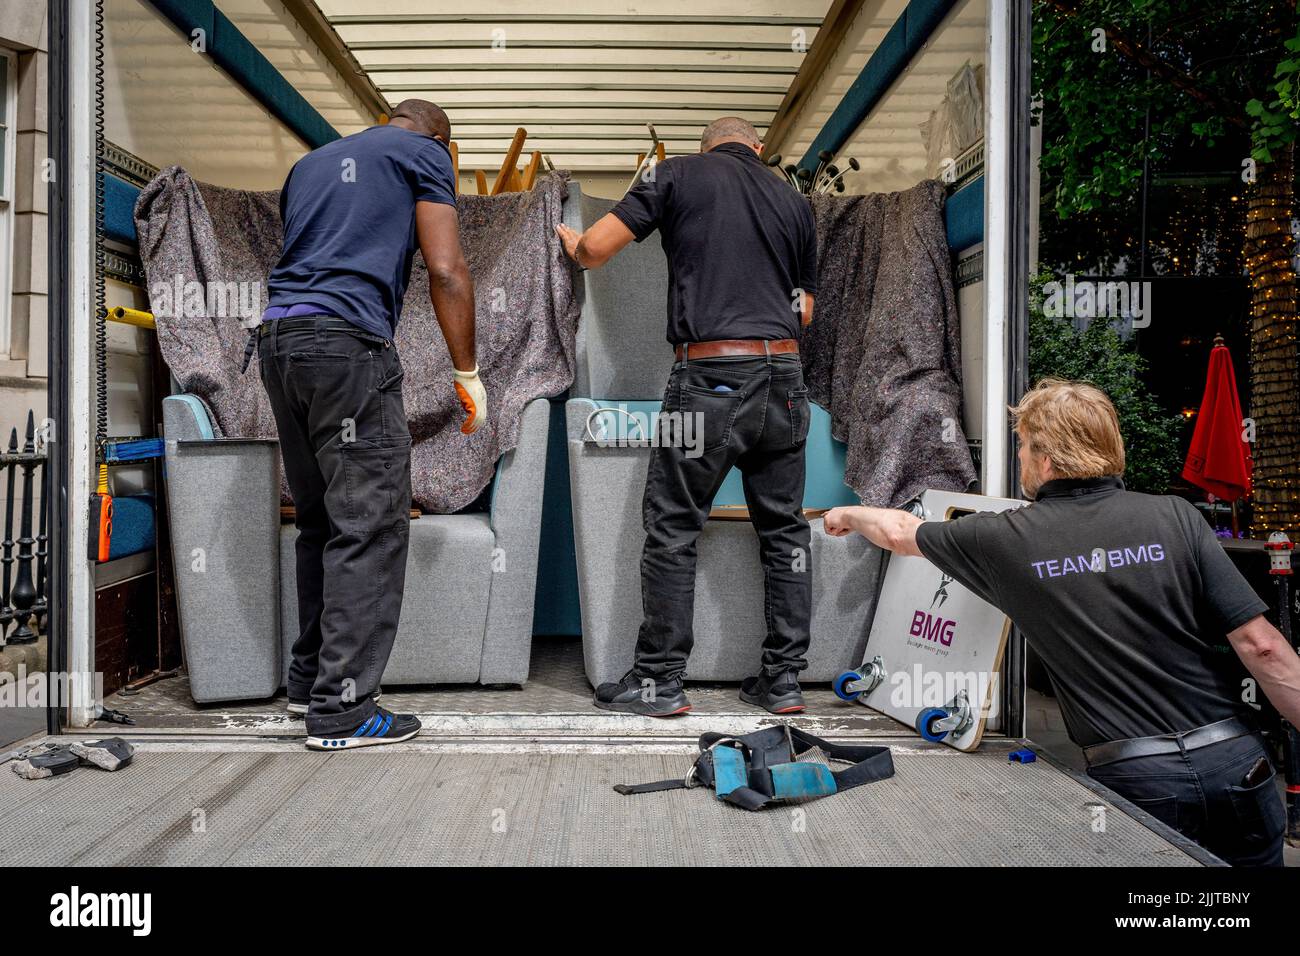 Corporate office furniture including coat stands and seating are being loaded into a van and taken away for temporary storage in the Midlands, by removal men in the City of London, the capital's financial district, on 27th July 2022, in London, England. Stock Photo